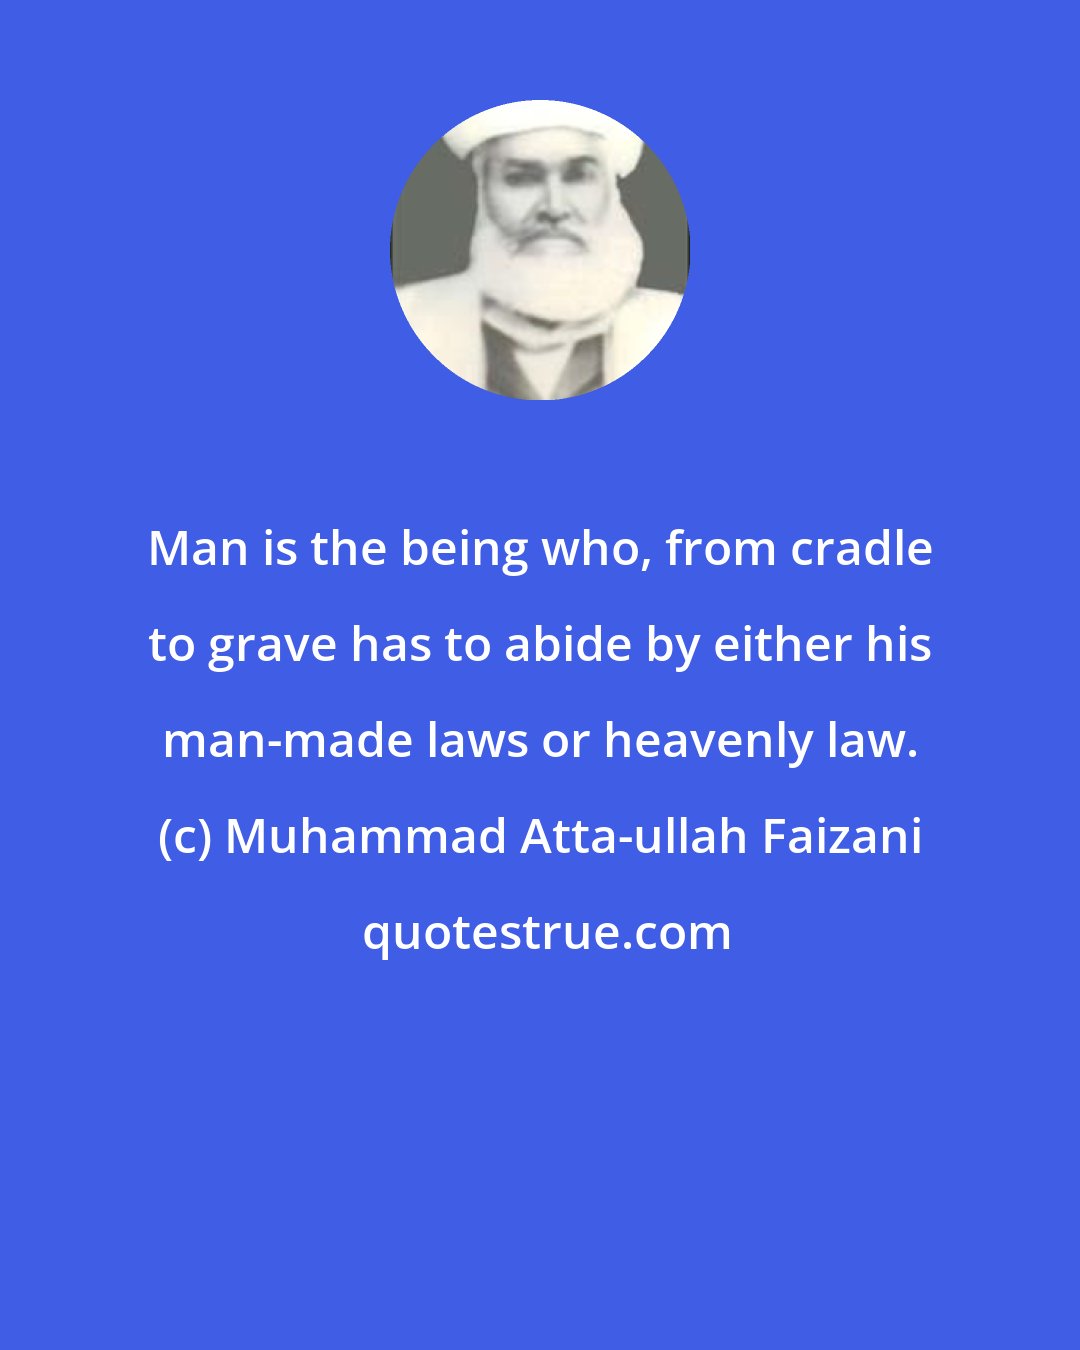 Muhammad Atta-ullah Faizani: Man is the being who, from cradle to grave has to abide by either his man-made laws or heavenly law.